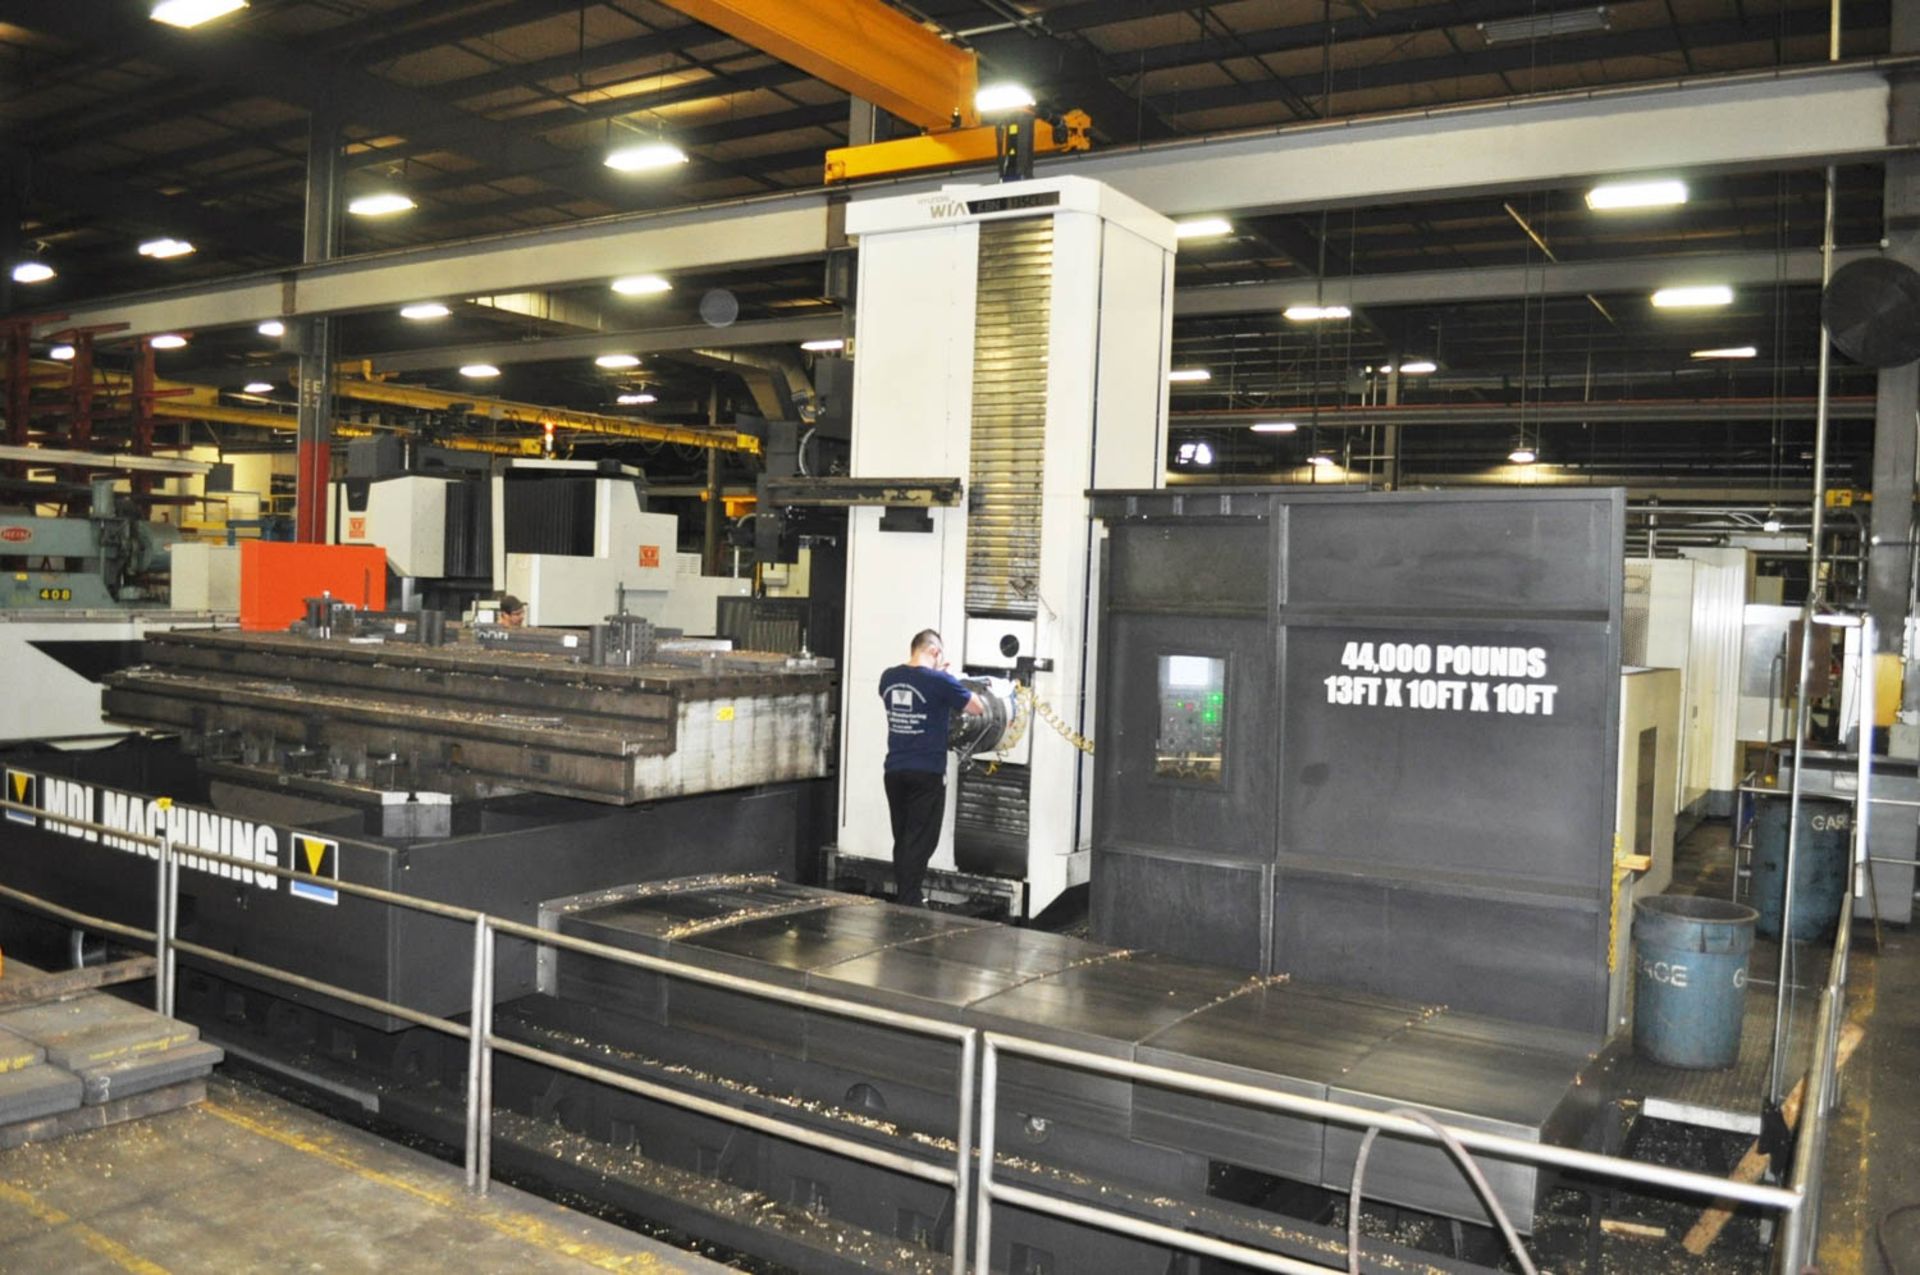 5.31" HYUNDAI KIA MDL. KBN-135CL CNC TABLE TYPE HORIZONTAL BORING MILL, WITH FANUC 31i-A CNC - Image 2 of 8